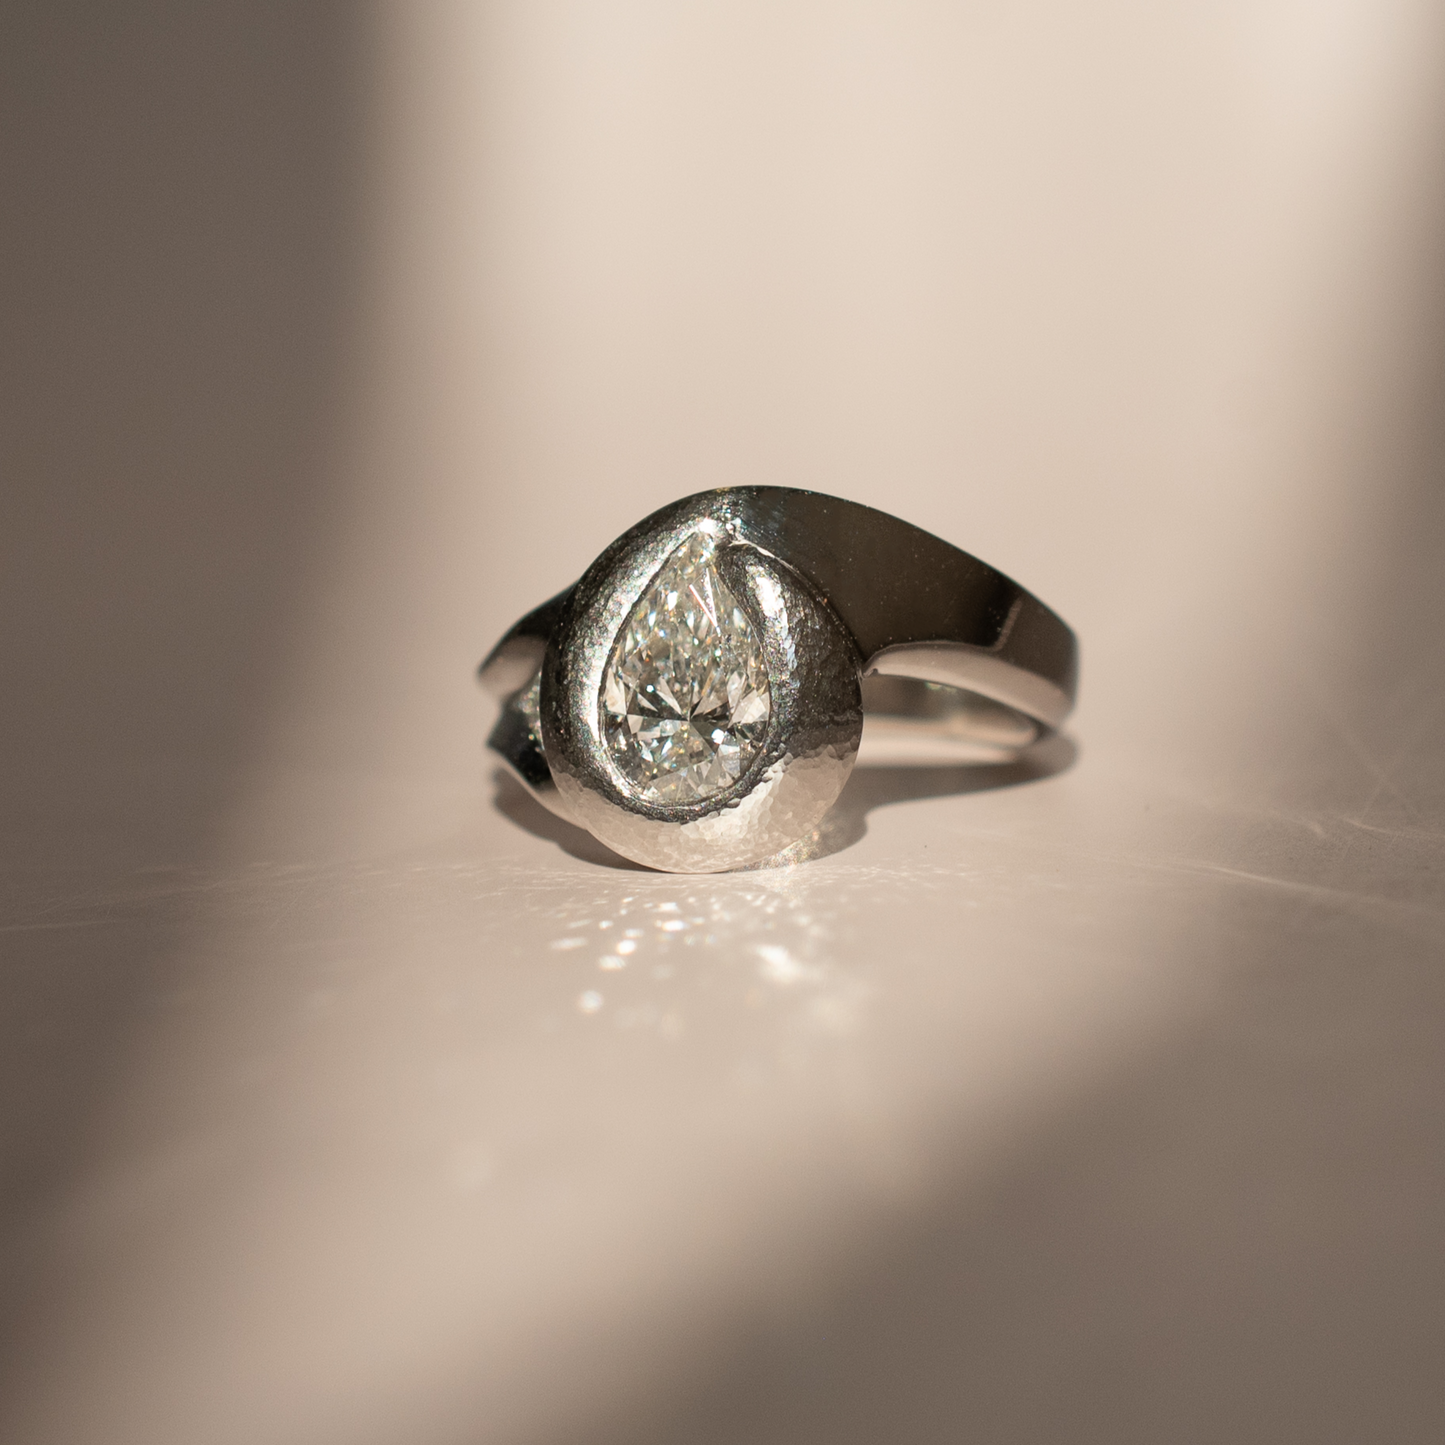 The Sculpted Diamond Ring by Jay Lubeck